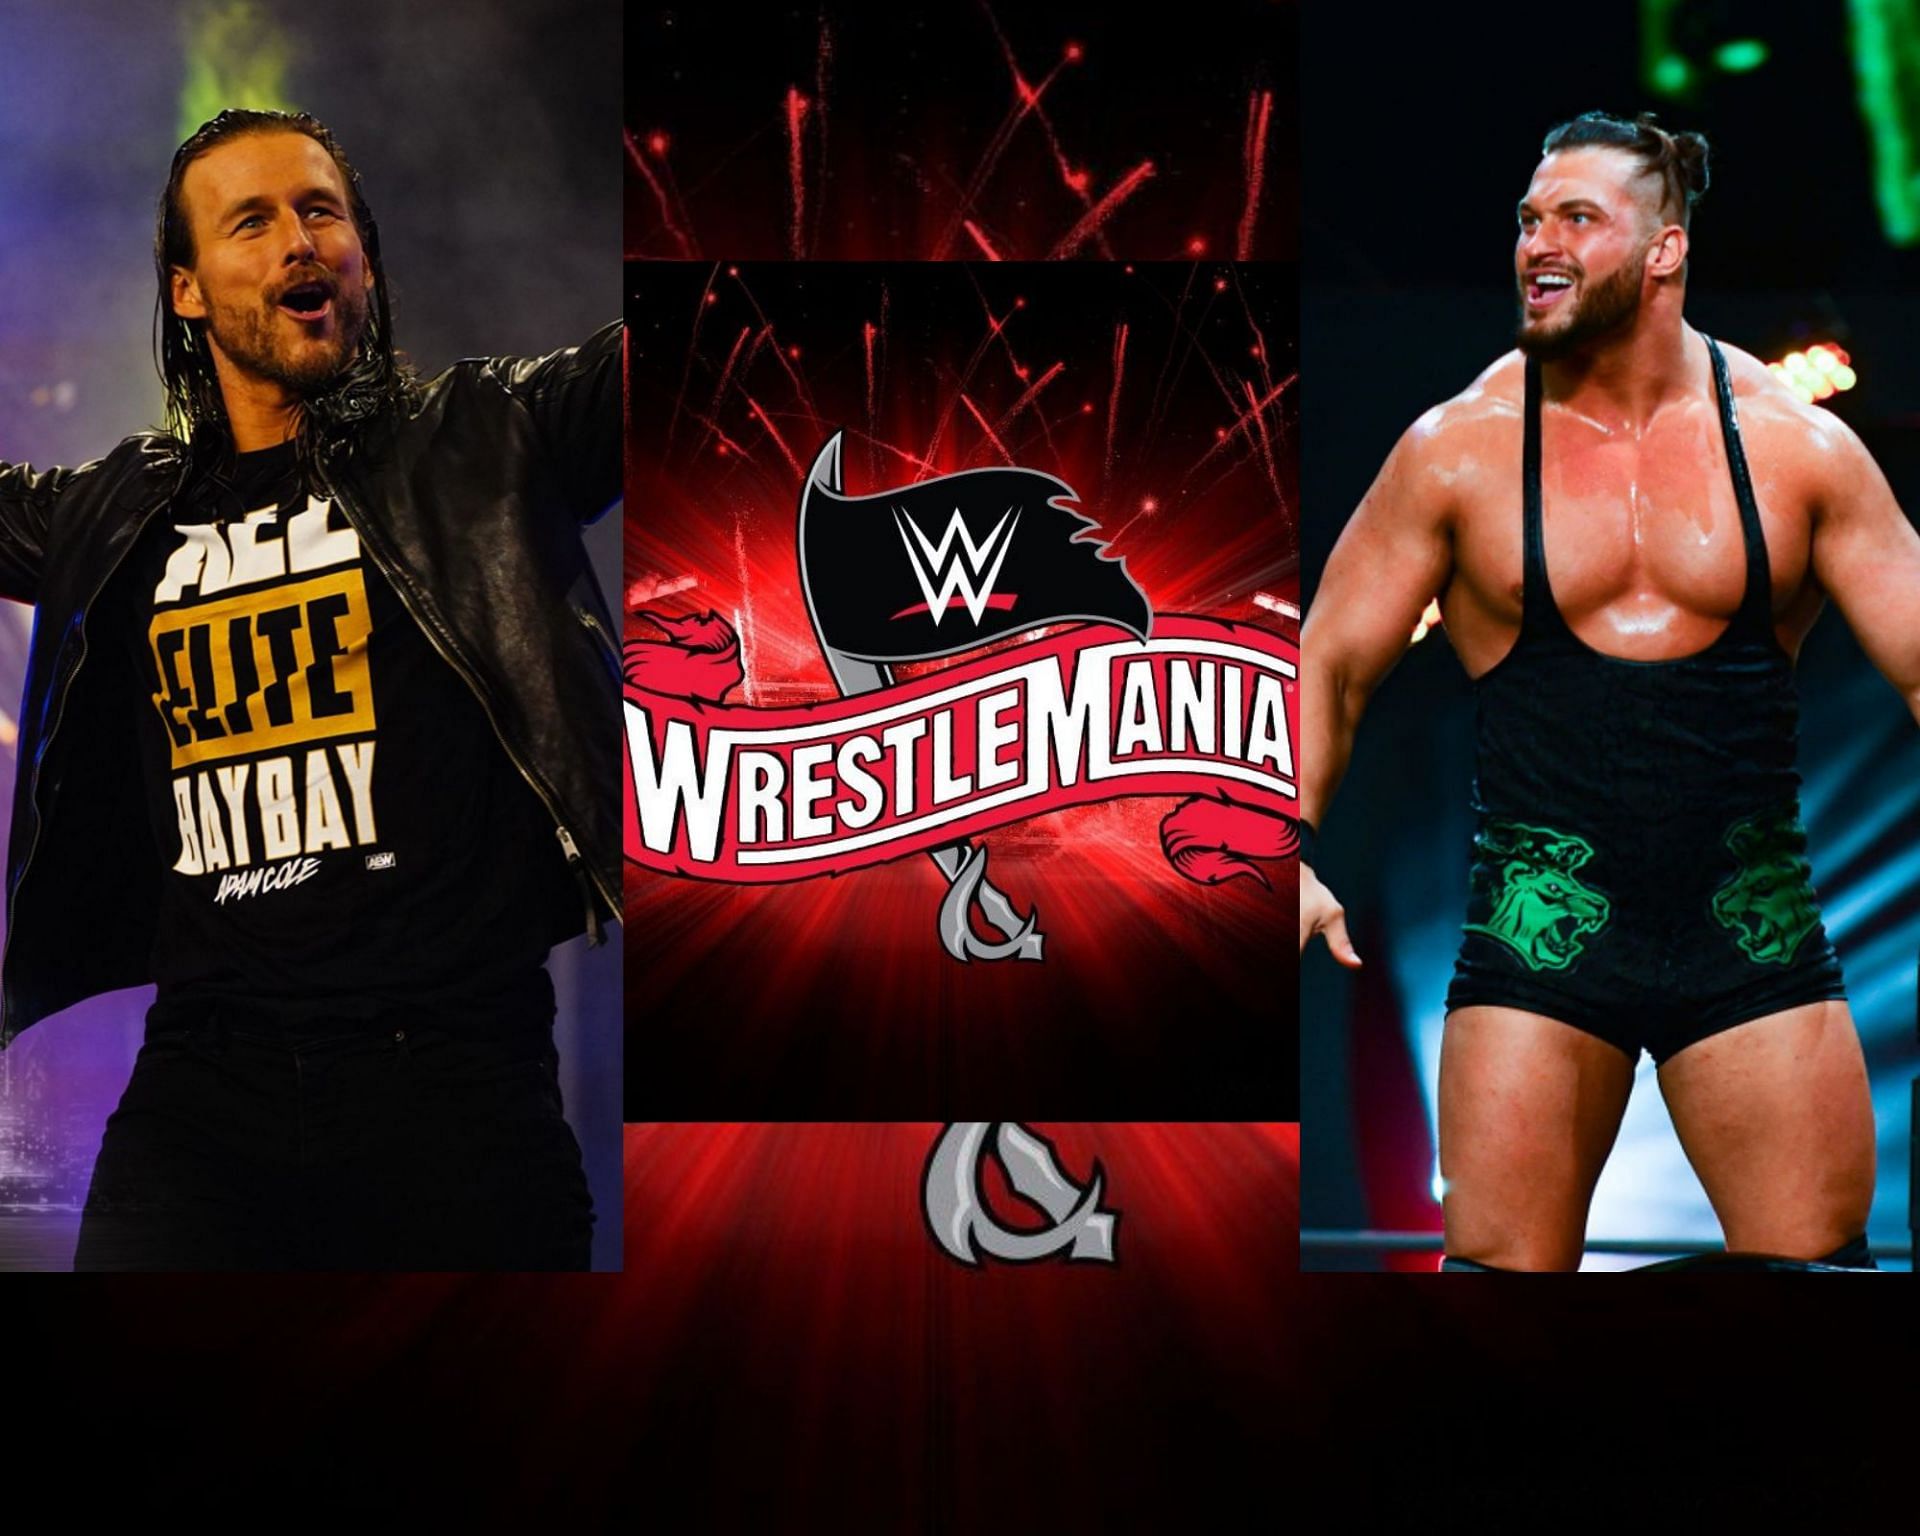 These AEW stars might be on a main event of WrestleMania someday!